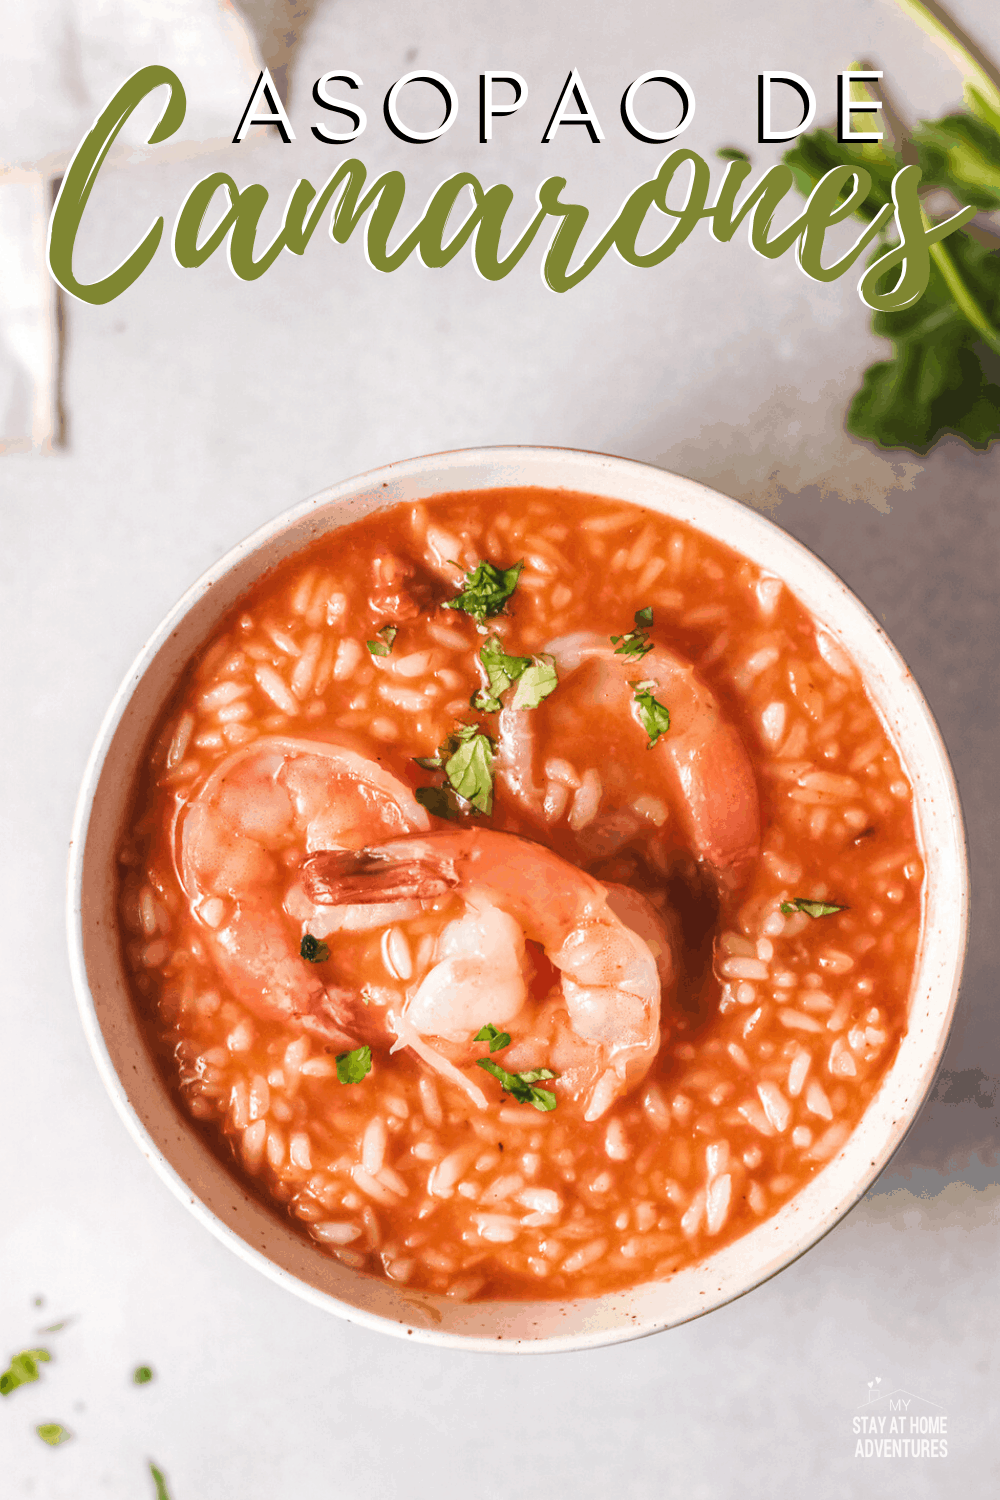 Asopao de Camarones is a flavorful shrimp and rice stew. If you love shrimp and want a new way to cook it, give this recipe a try. #asapao #latinfood #shrimpstew #shrimpandrice via @mystayathome